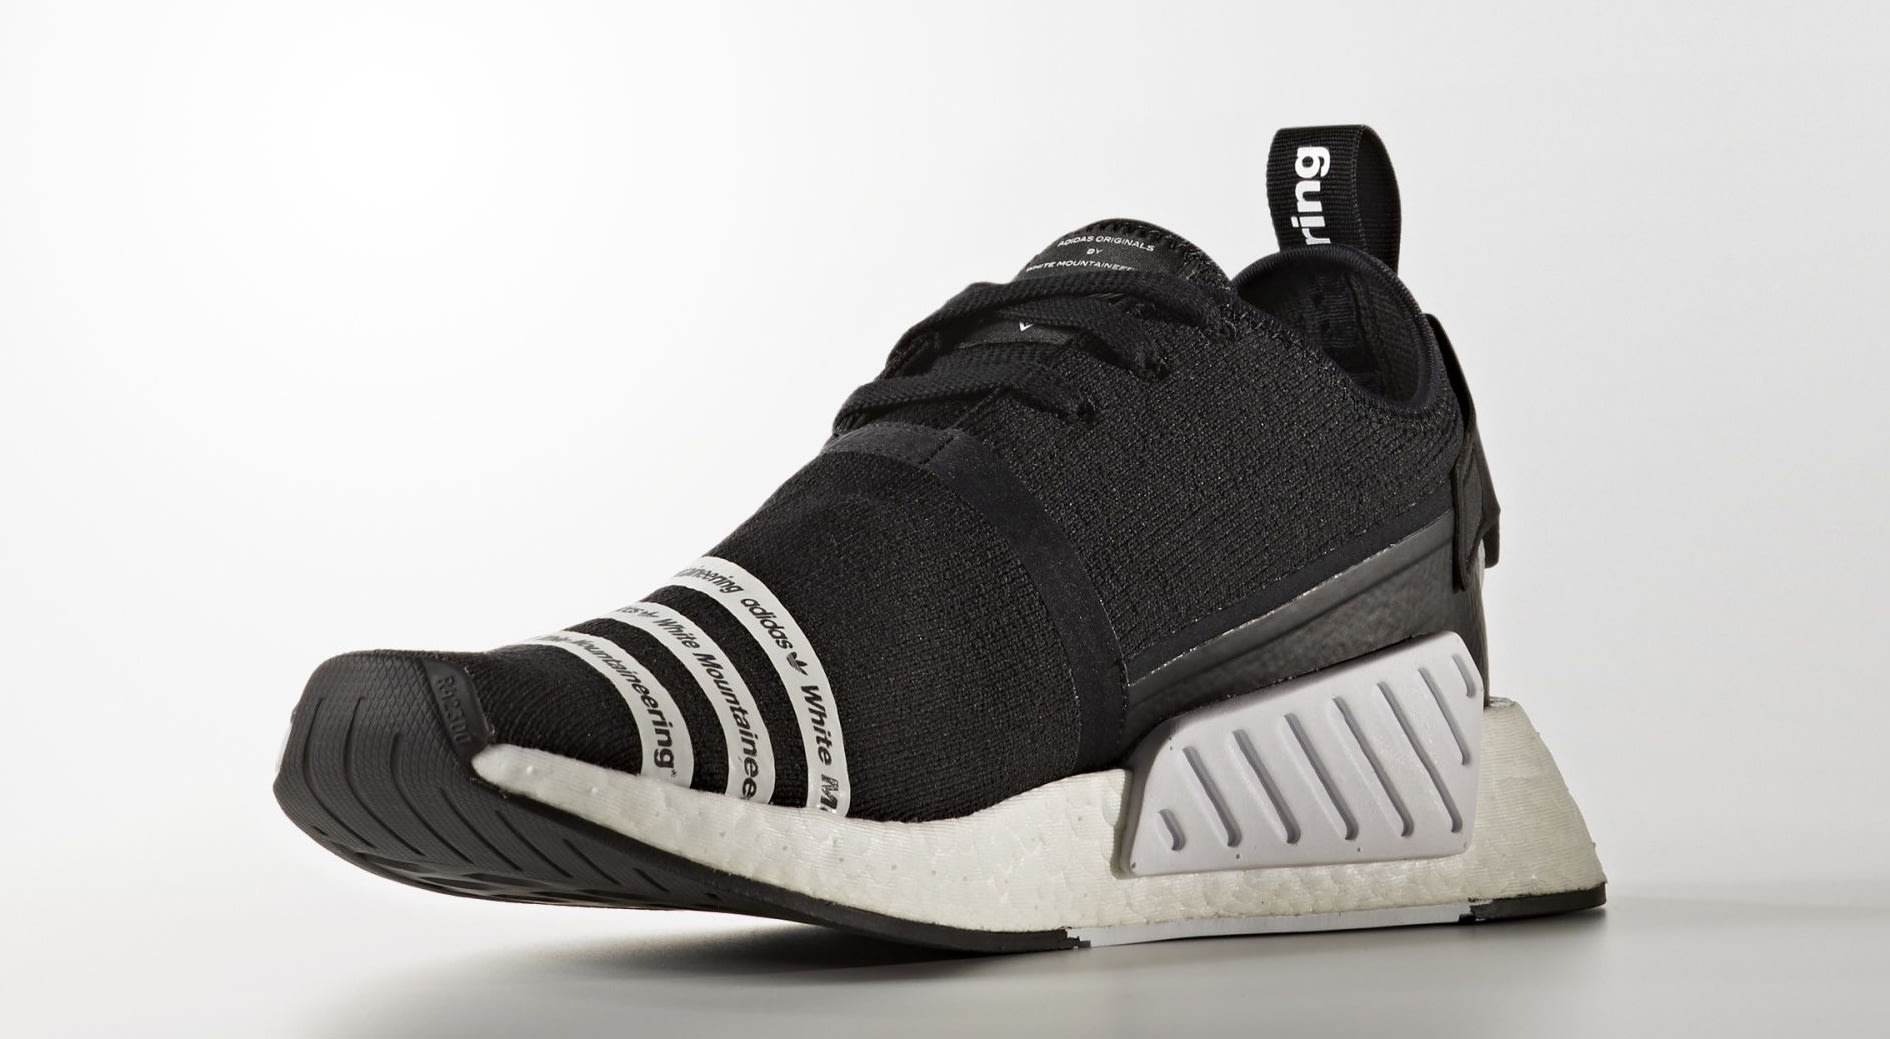 adidas outlet stores near me adidas nmd 